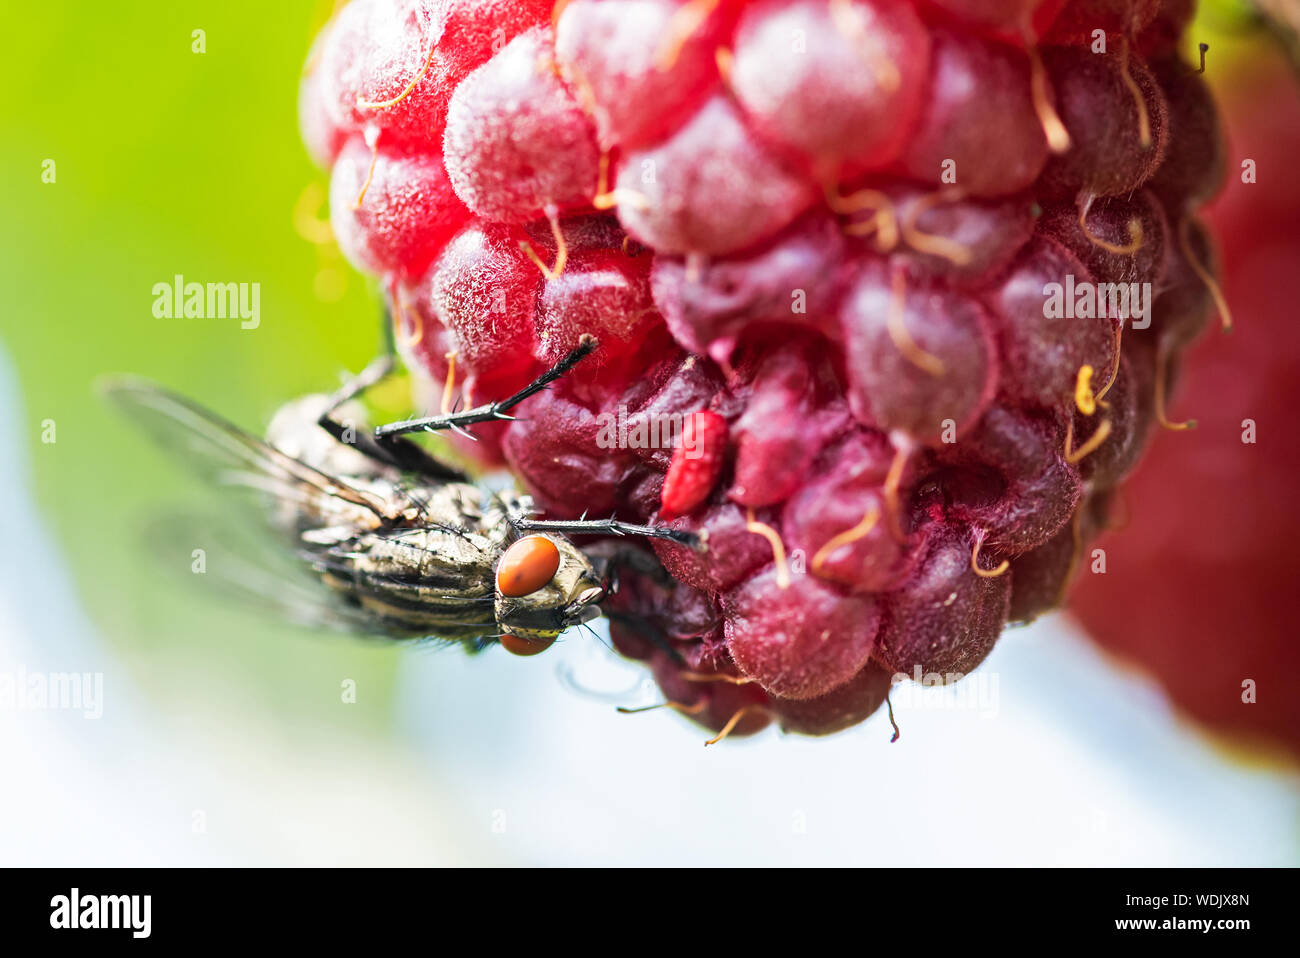 Fly sits on red raspberries. The fly carries bacterial infections. Stock Photo